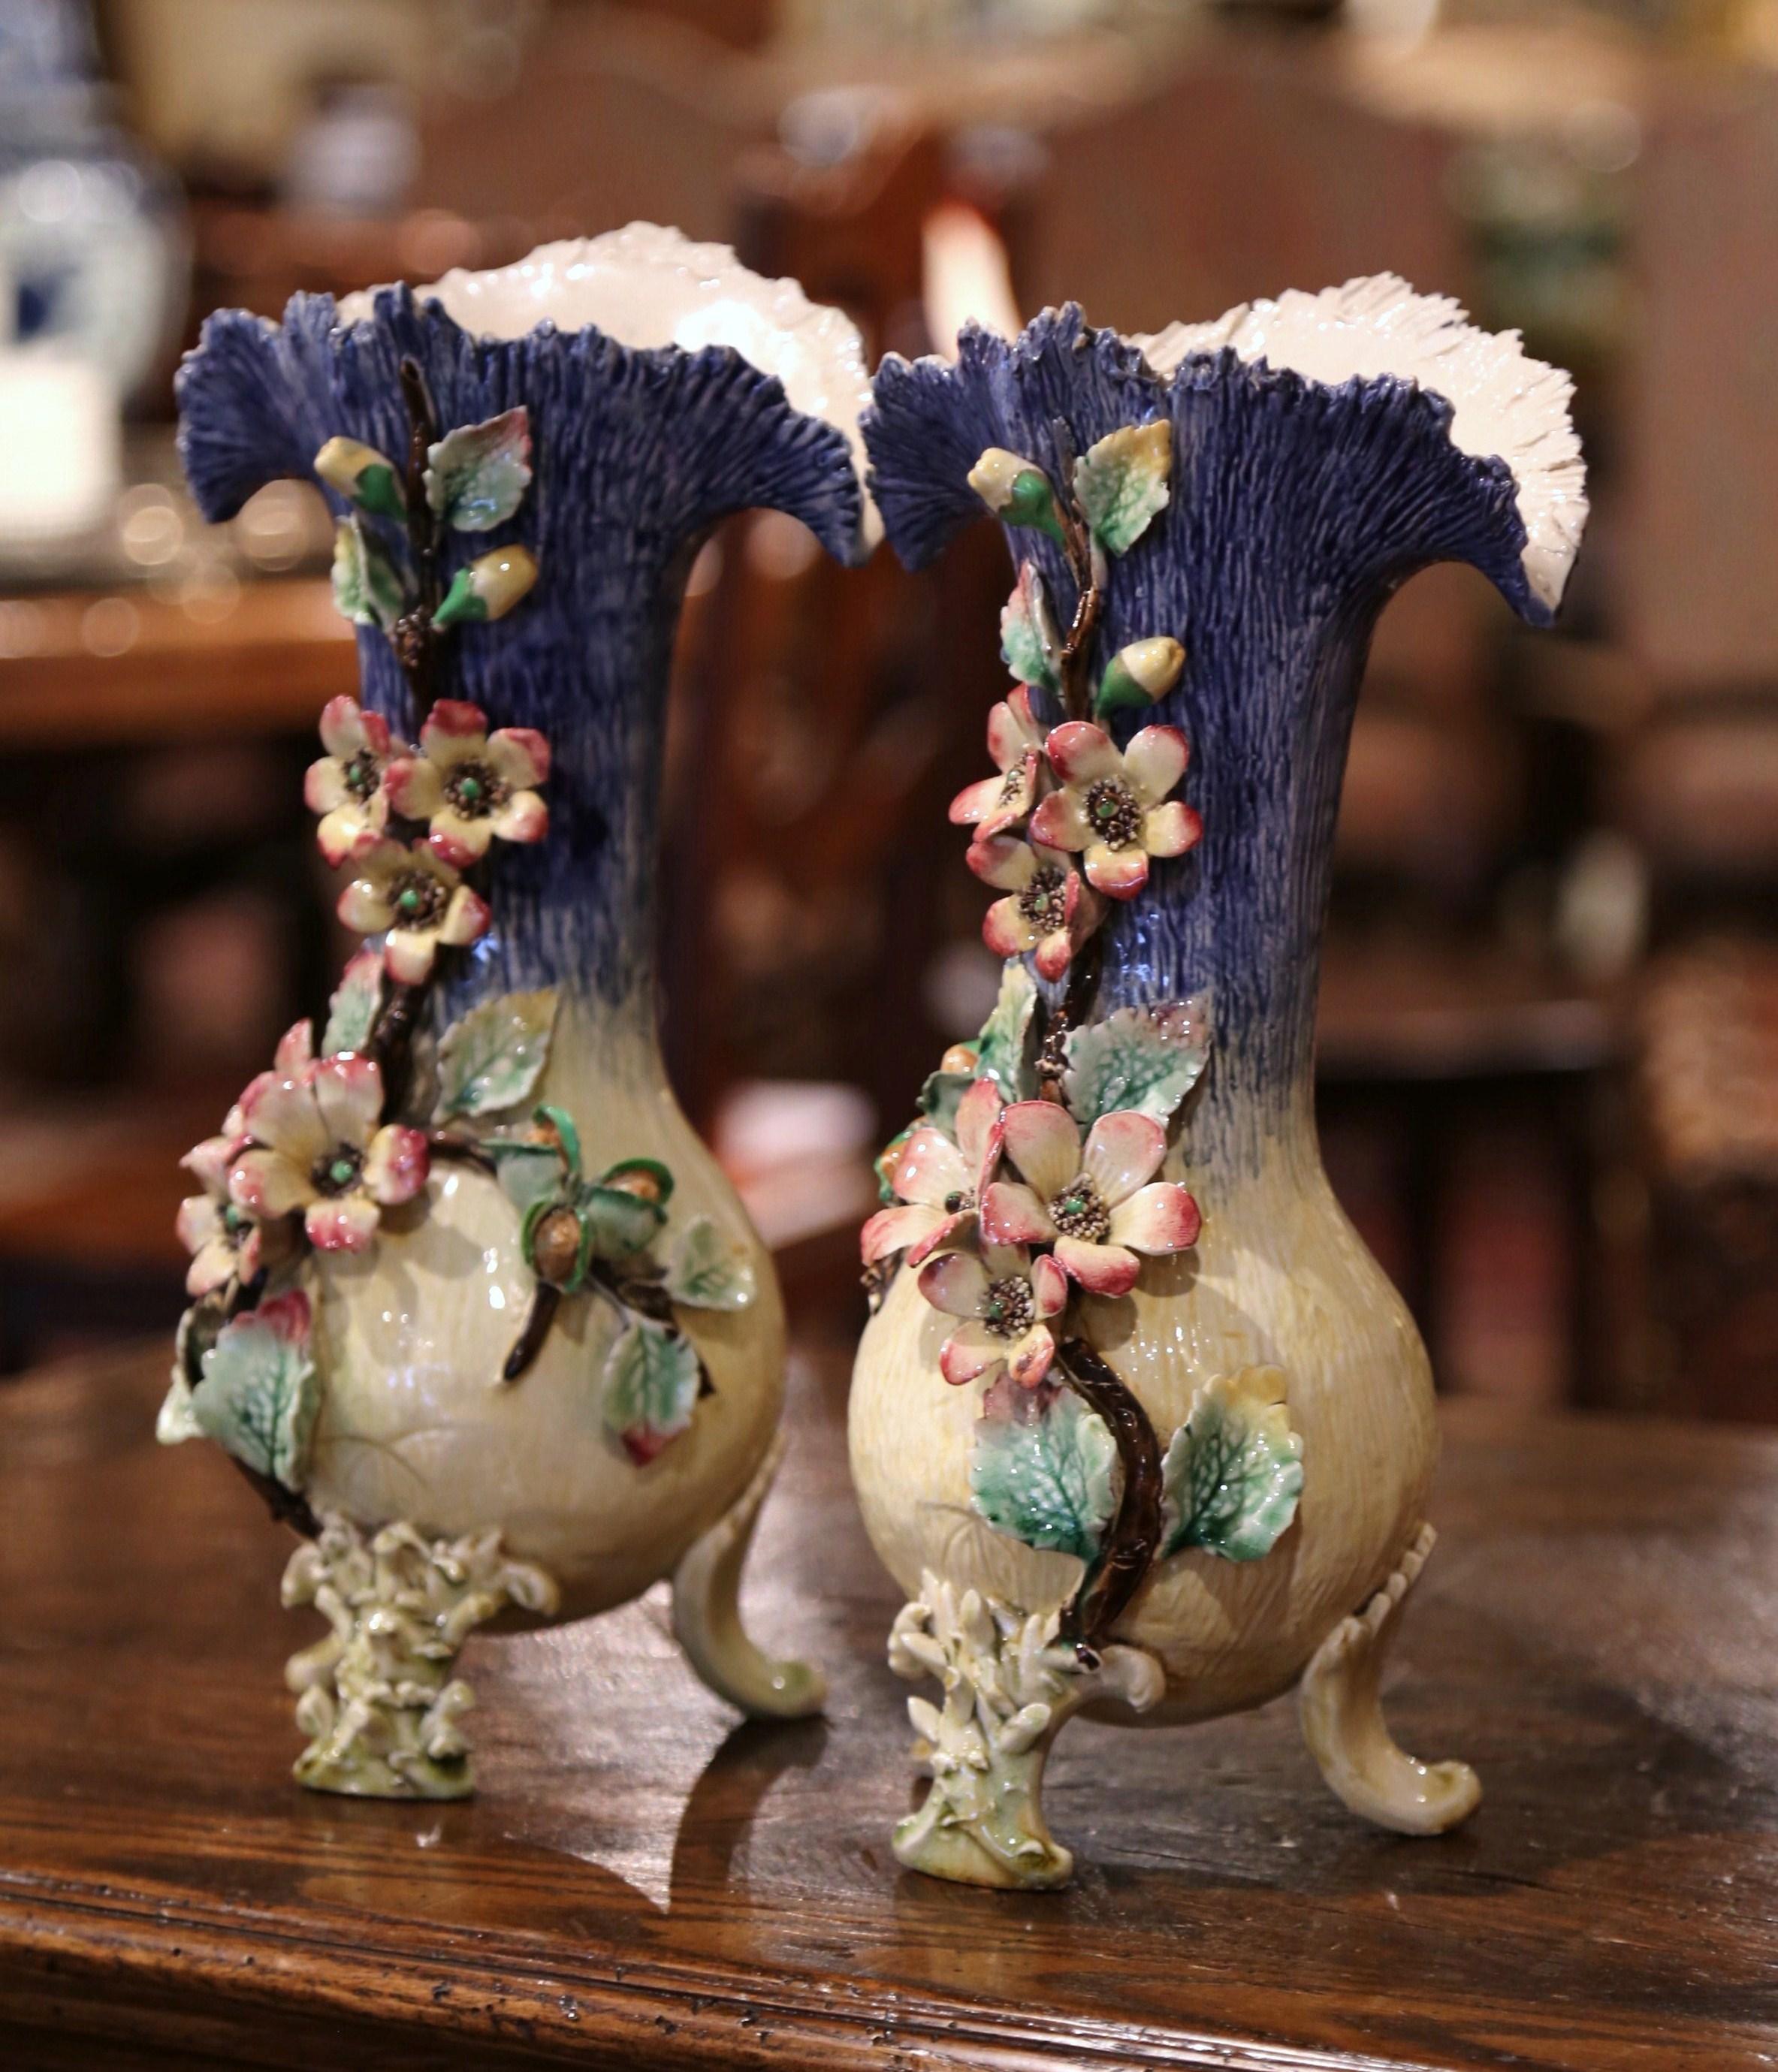 Beautifully sculpted and colorful, this pair of antique Majolica vases would be a wonderful addition to a mantel, tabletop or bookshelf. Crafted in France, circa 1870, each hand painted piece stands on three curved feet and features a wide and